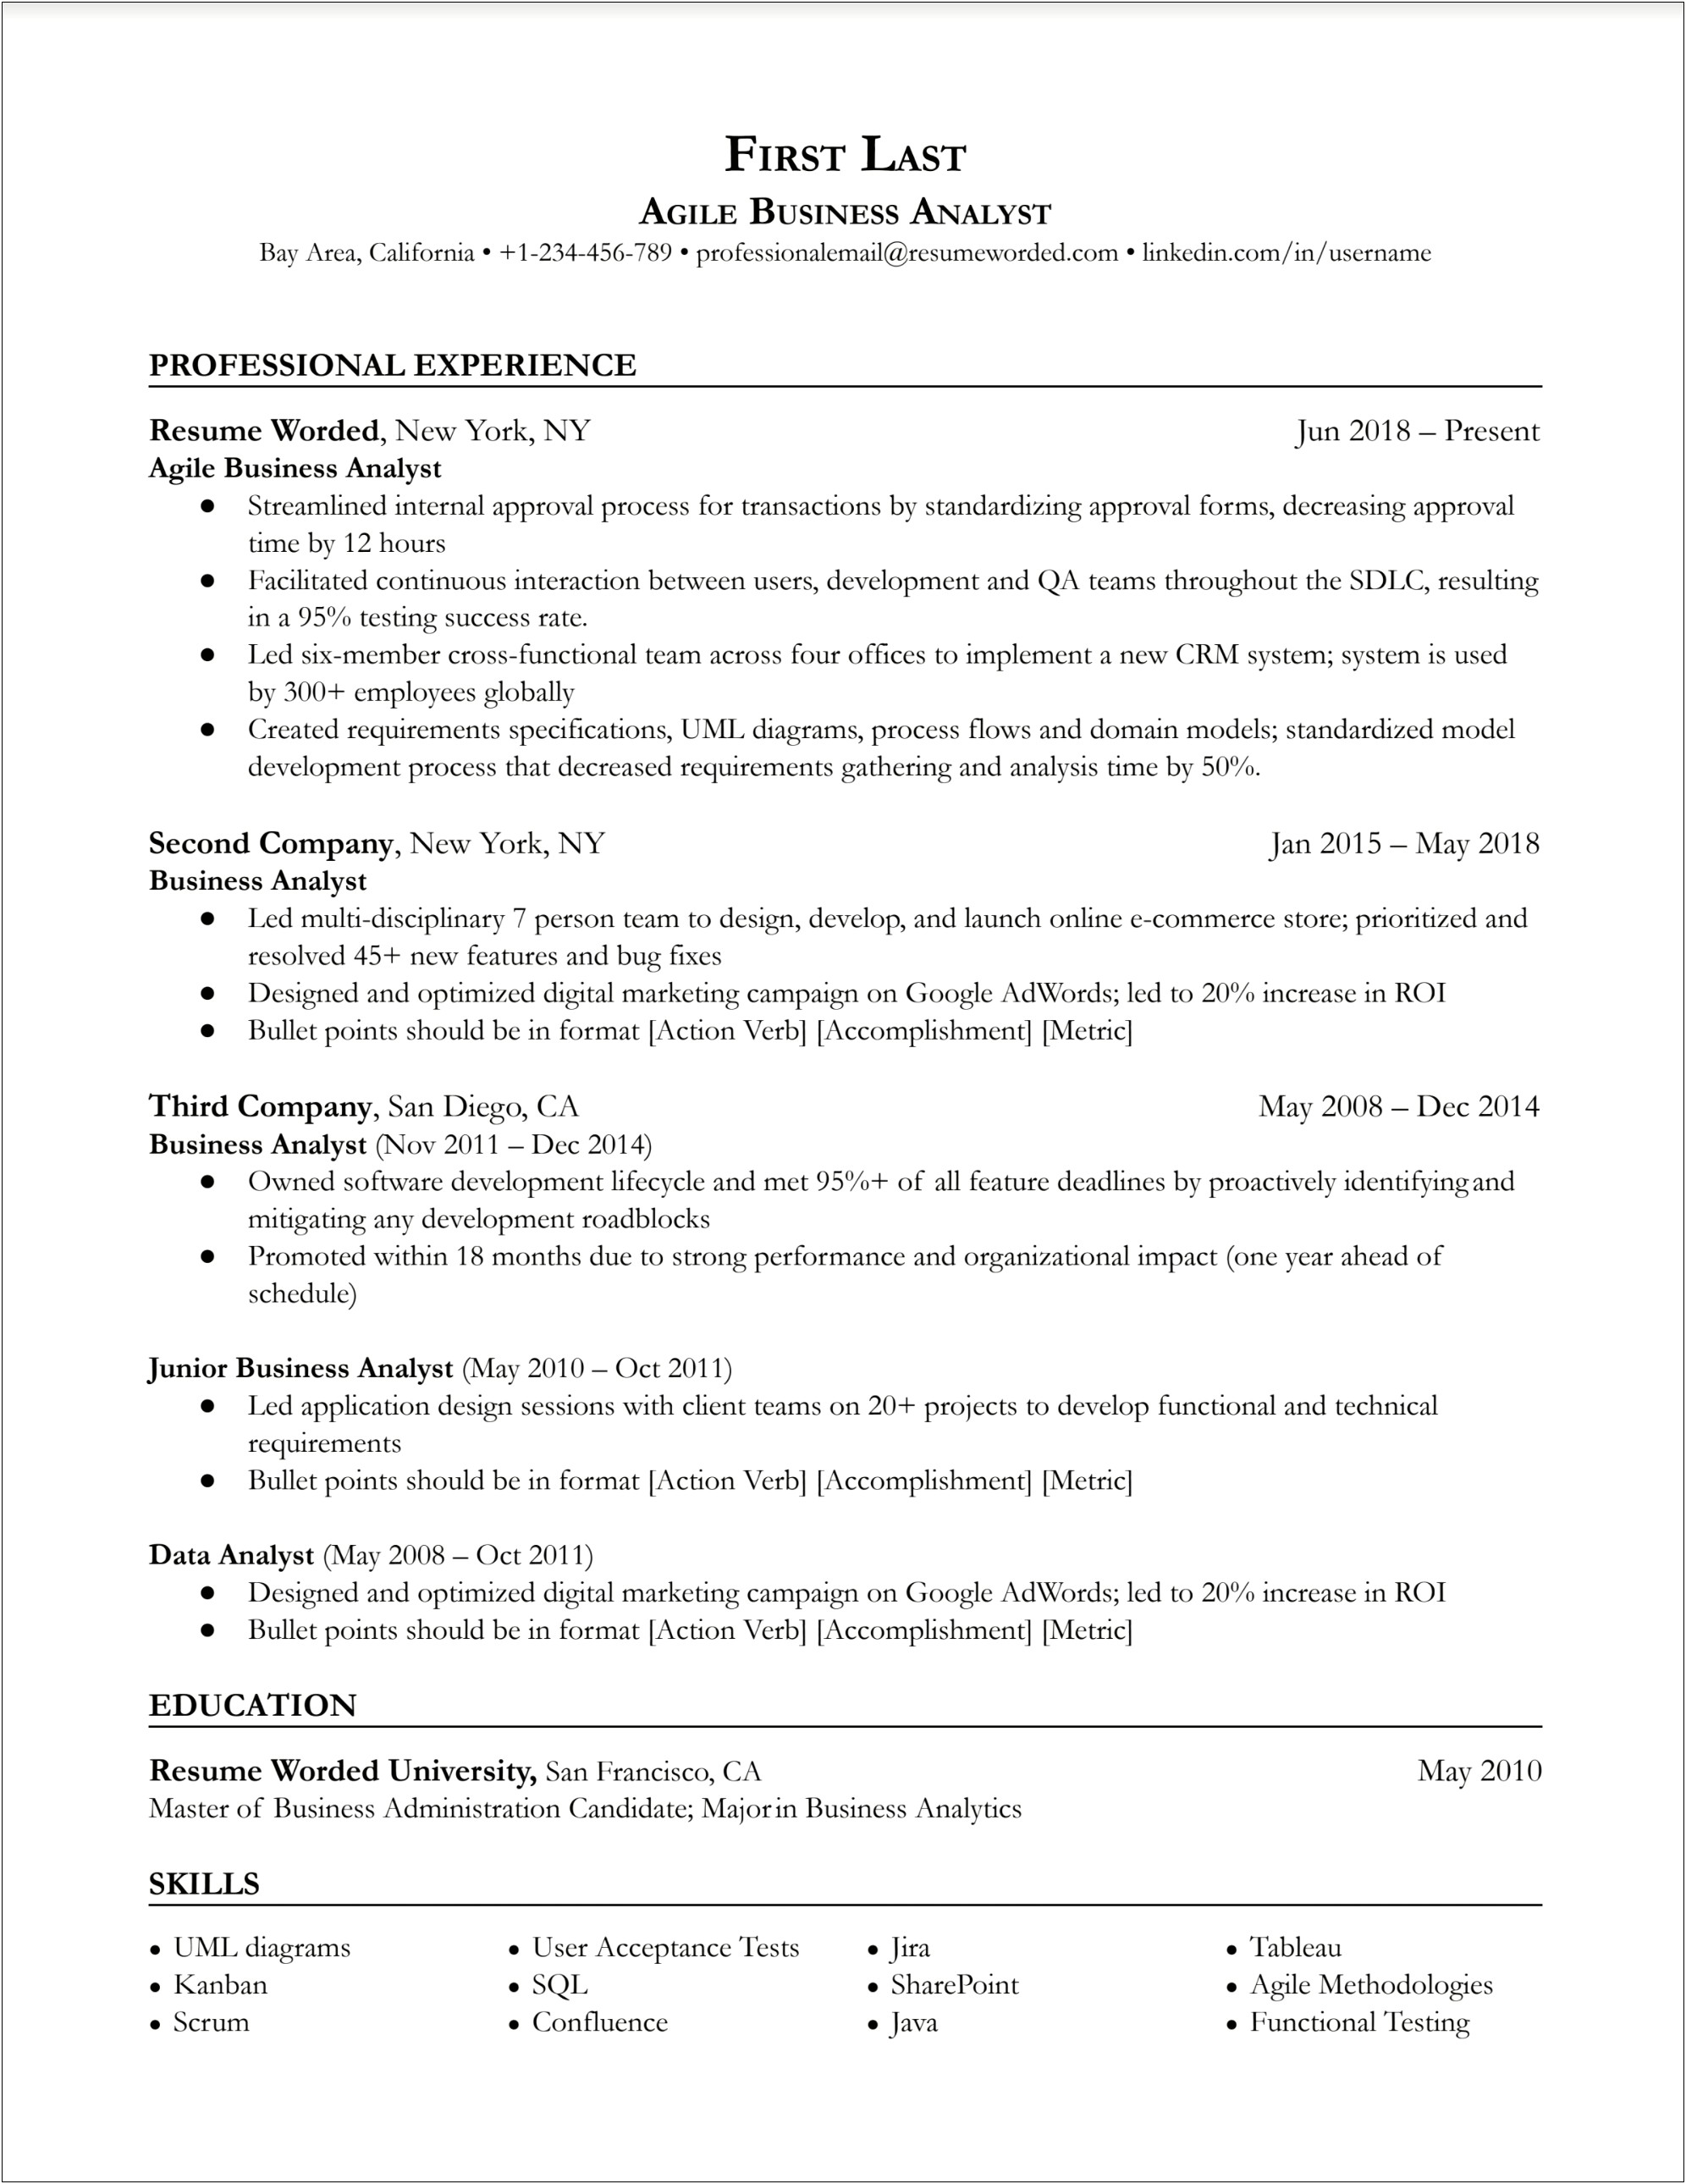 Sample Resume On Corporate Actions Analyst